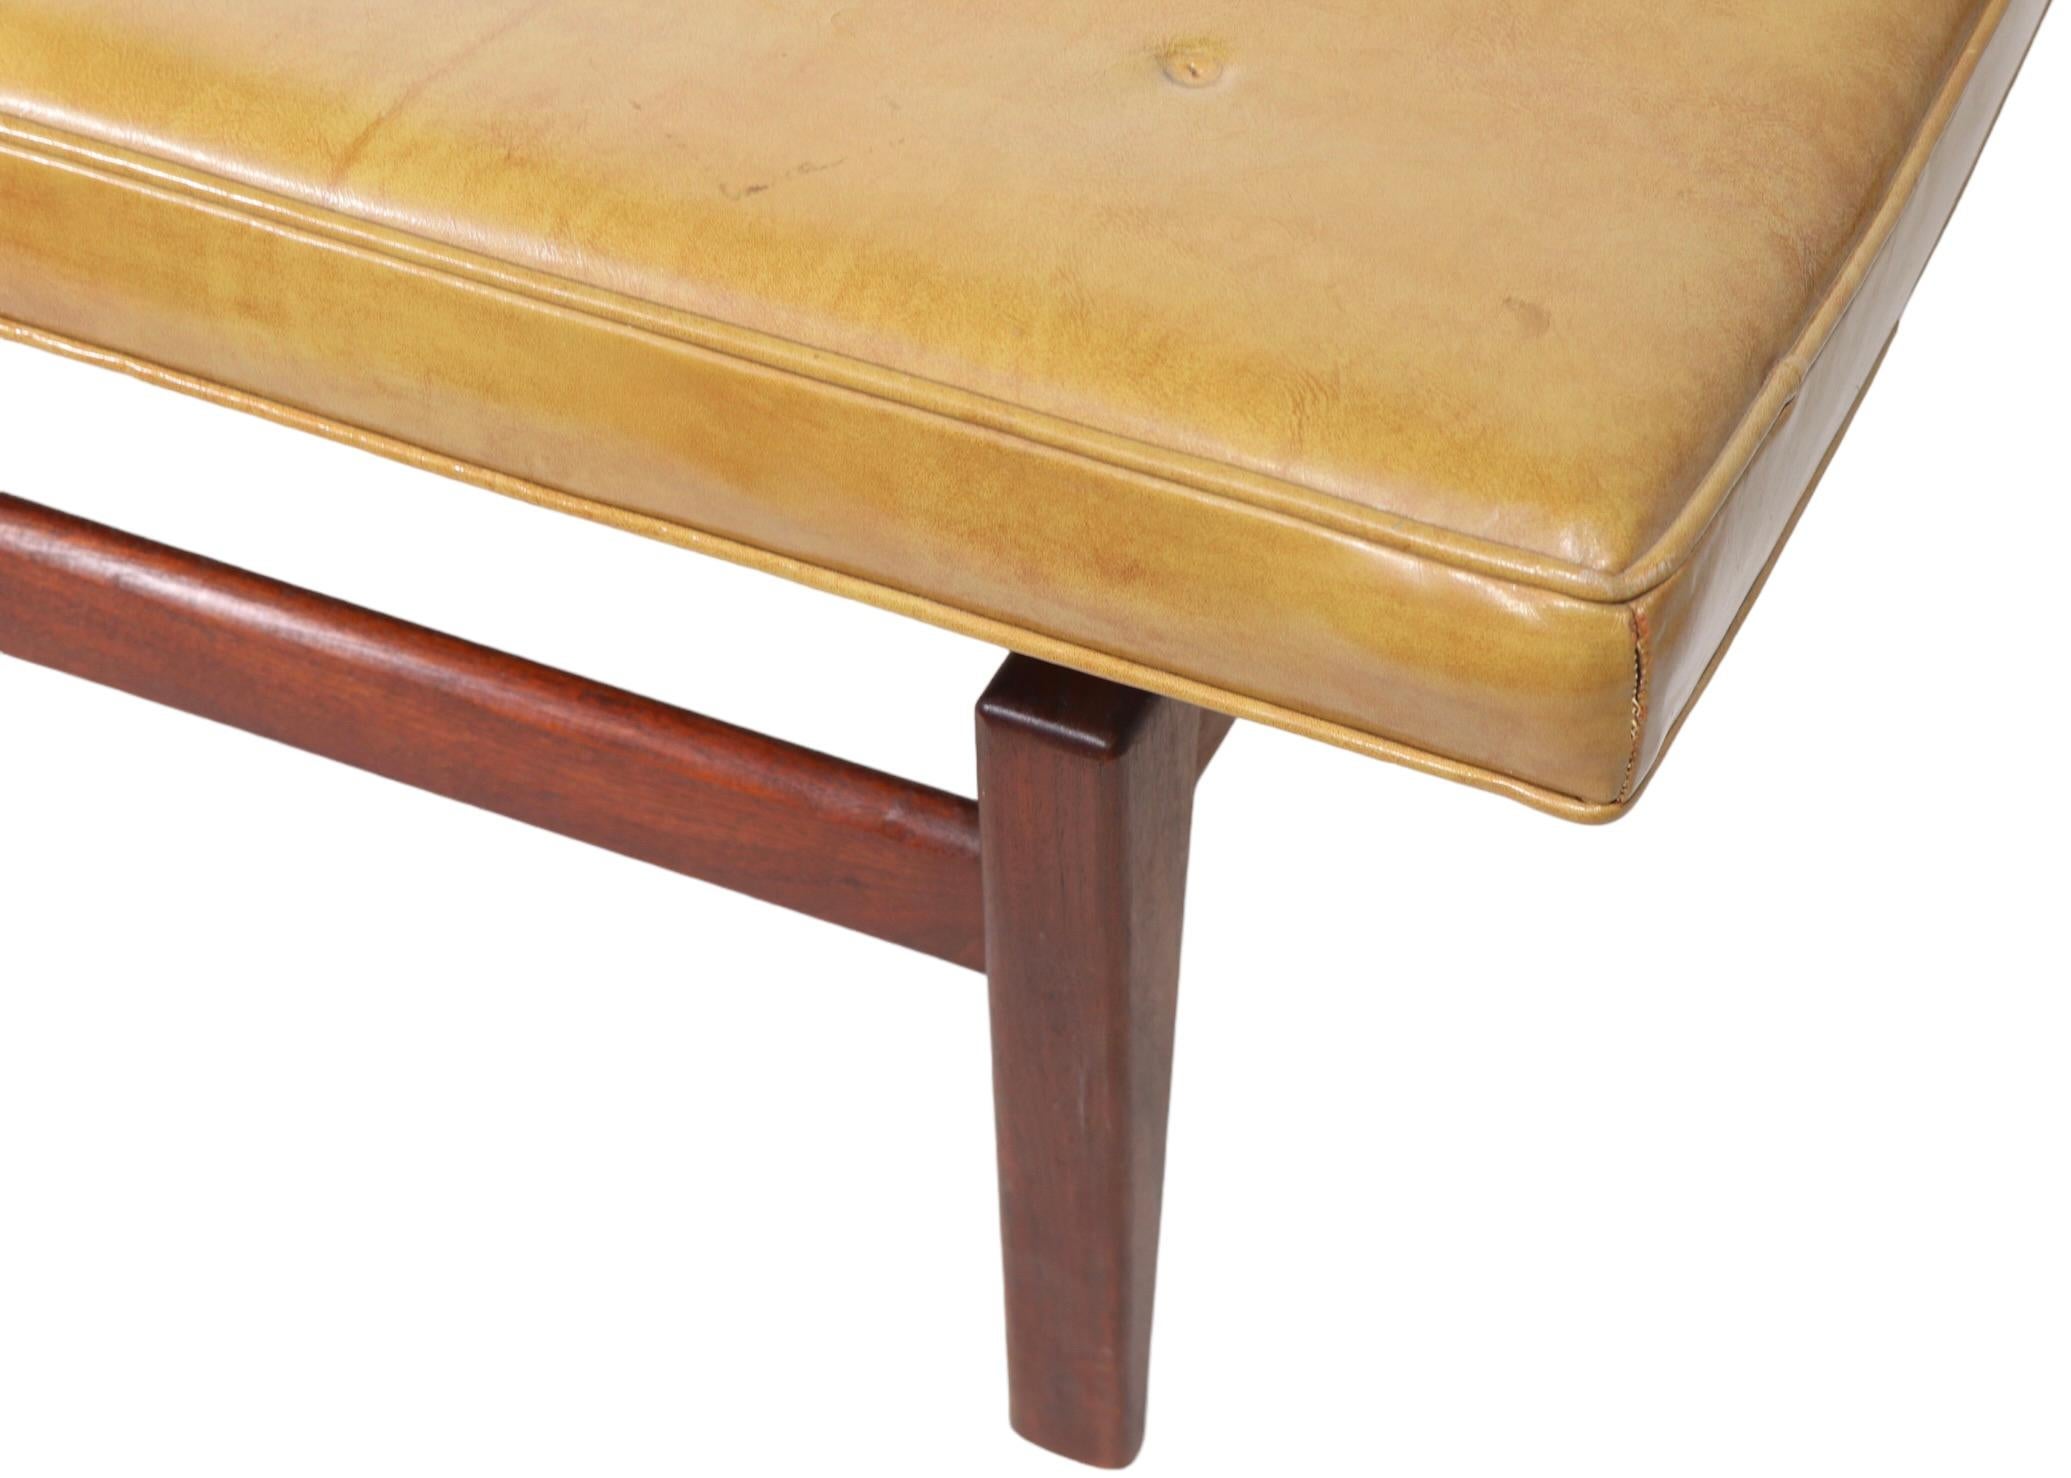 Wood   Architectural Mid Century Jens Risom Bench with Walnut Legs and Leather Top  For Sale